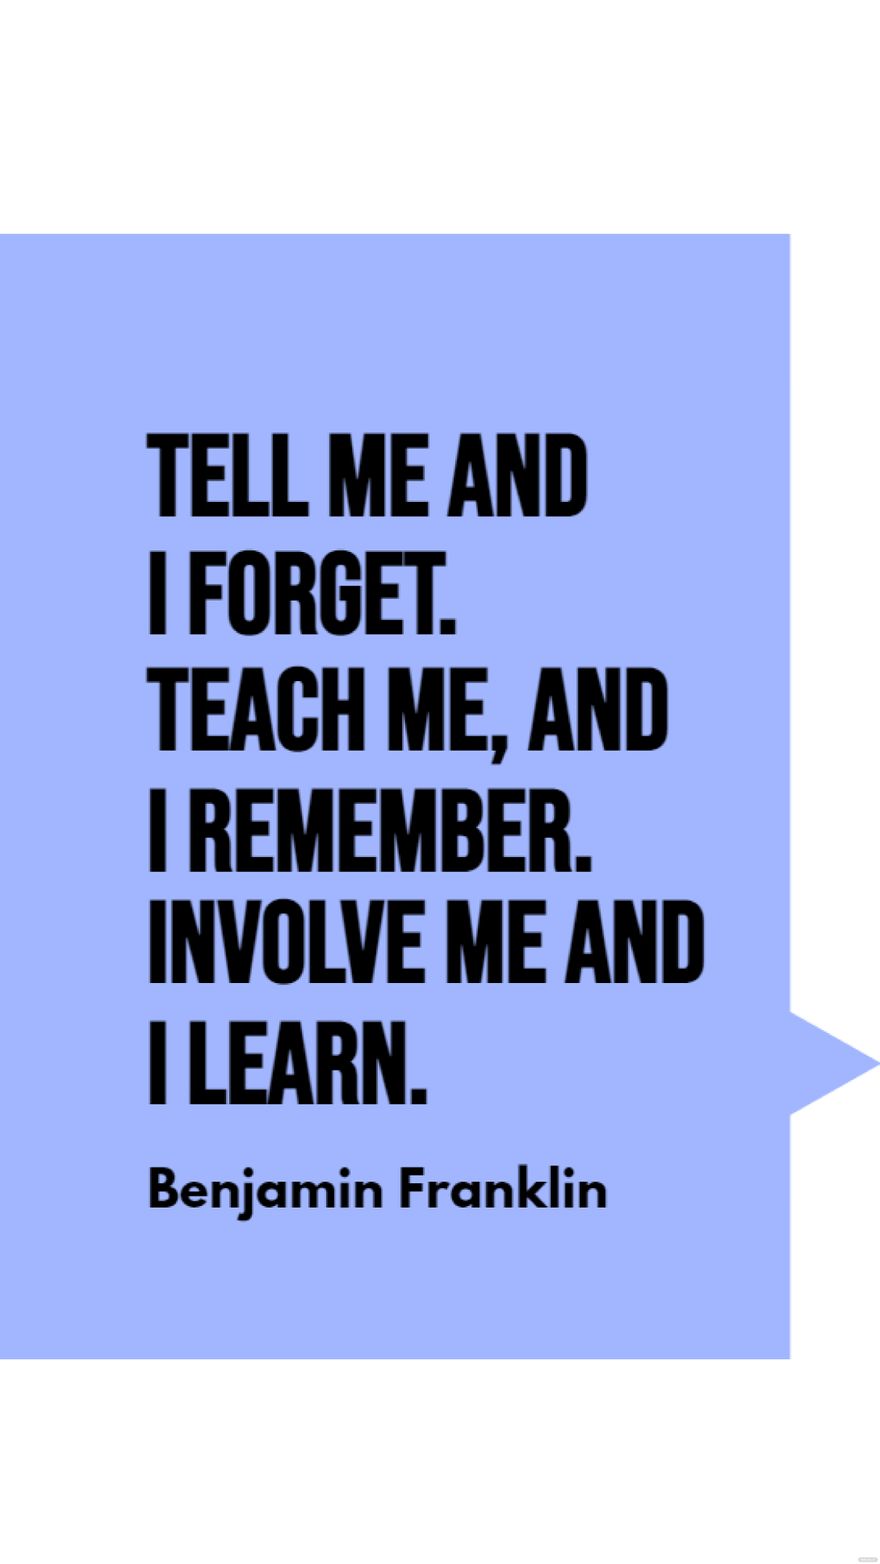 Benjamin Franklin - Tell me and I forget. Teach me, and I remember. Involve me and I learn.